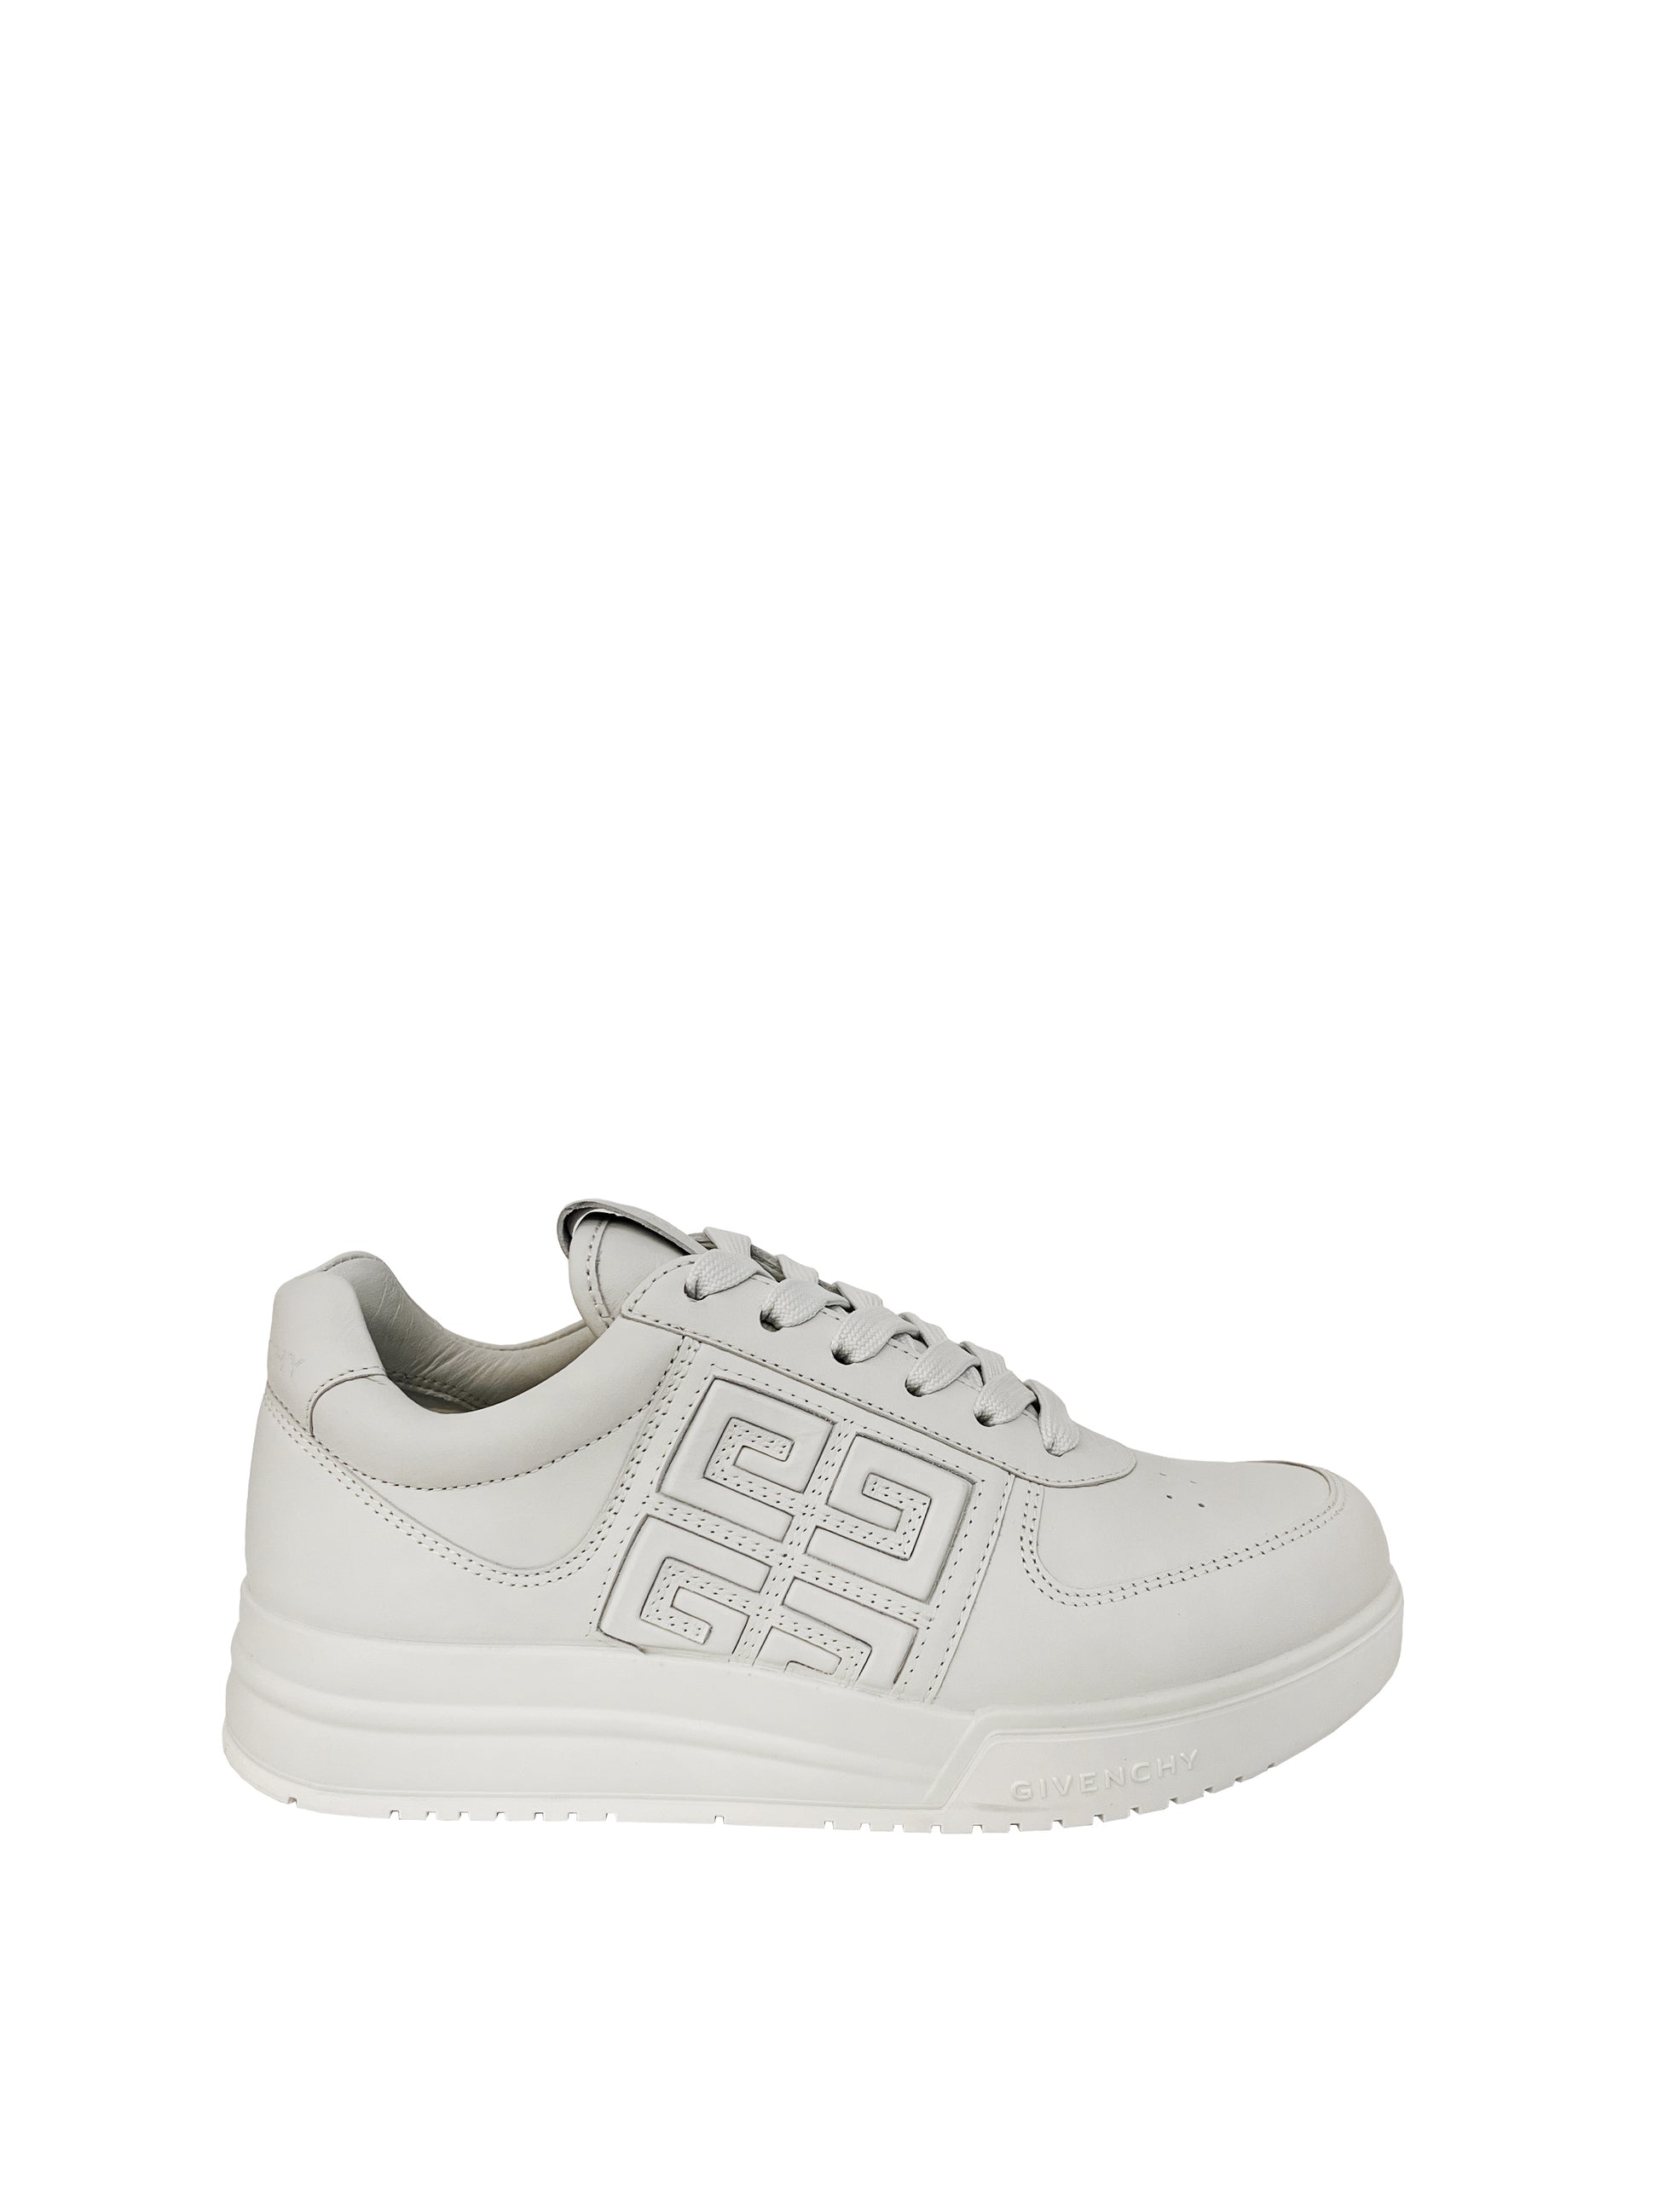 Givenchy Sneakers G4 Weiss - La Boutique Dresden